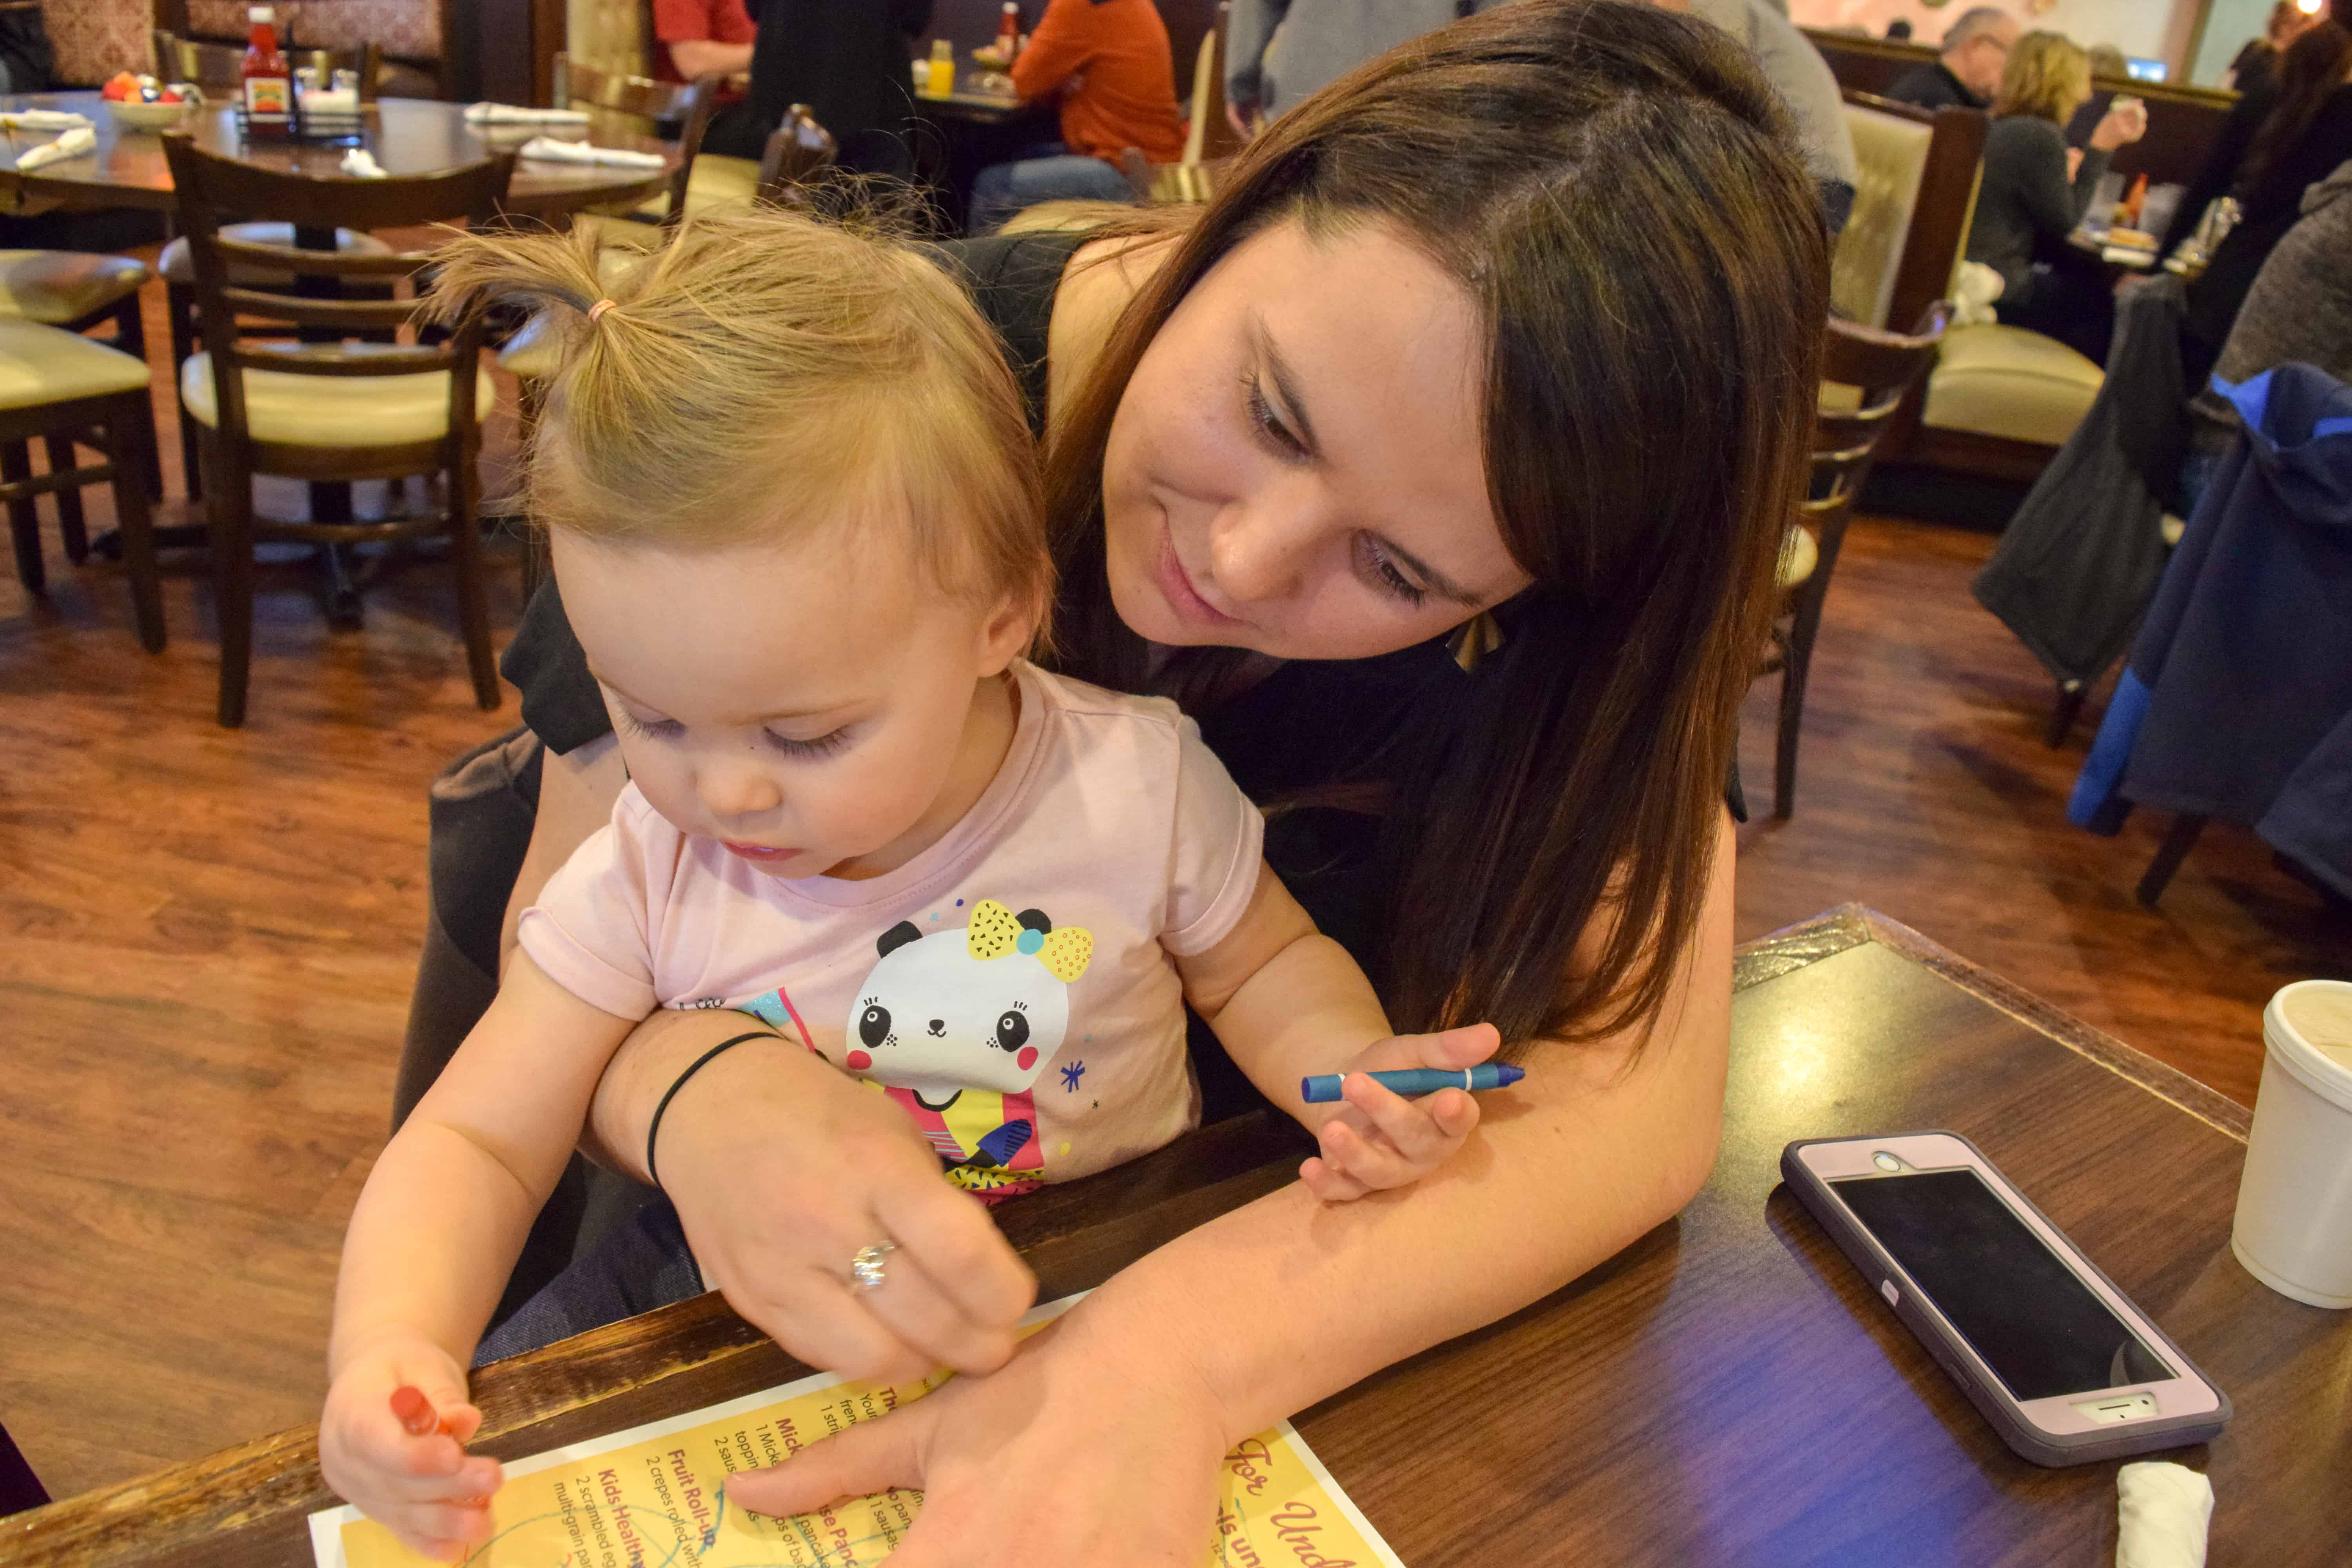 Indianapolis. This Lincoln Square Pancake House review tells you how it’s family friendly, what to get on the menu and all about their locations. We loved Lincoln Square Pancake House and can’t wait to visit again. 